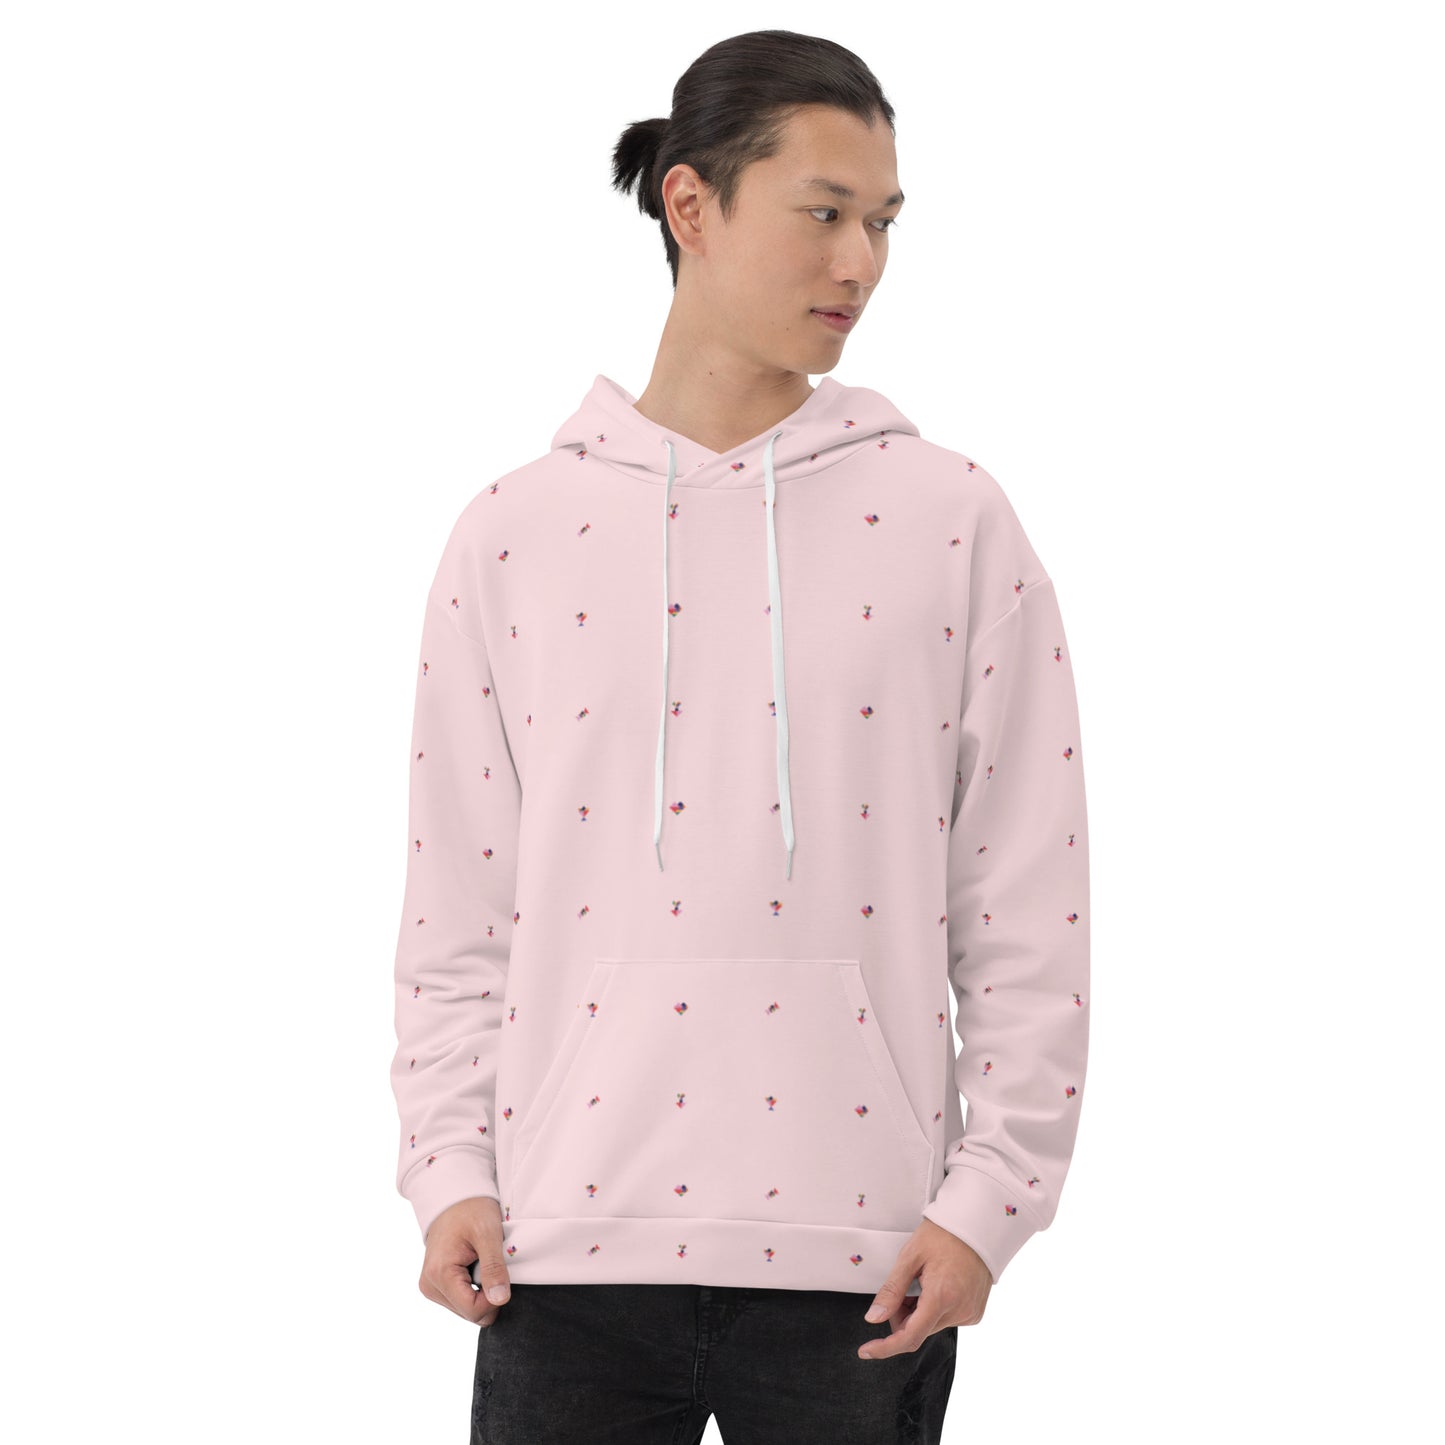 Candy pink unisex hoodie